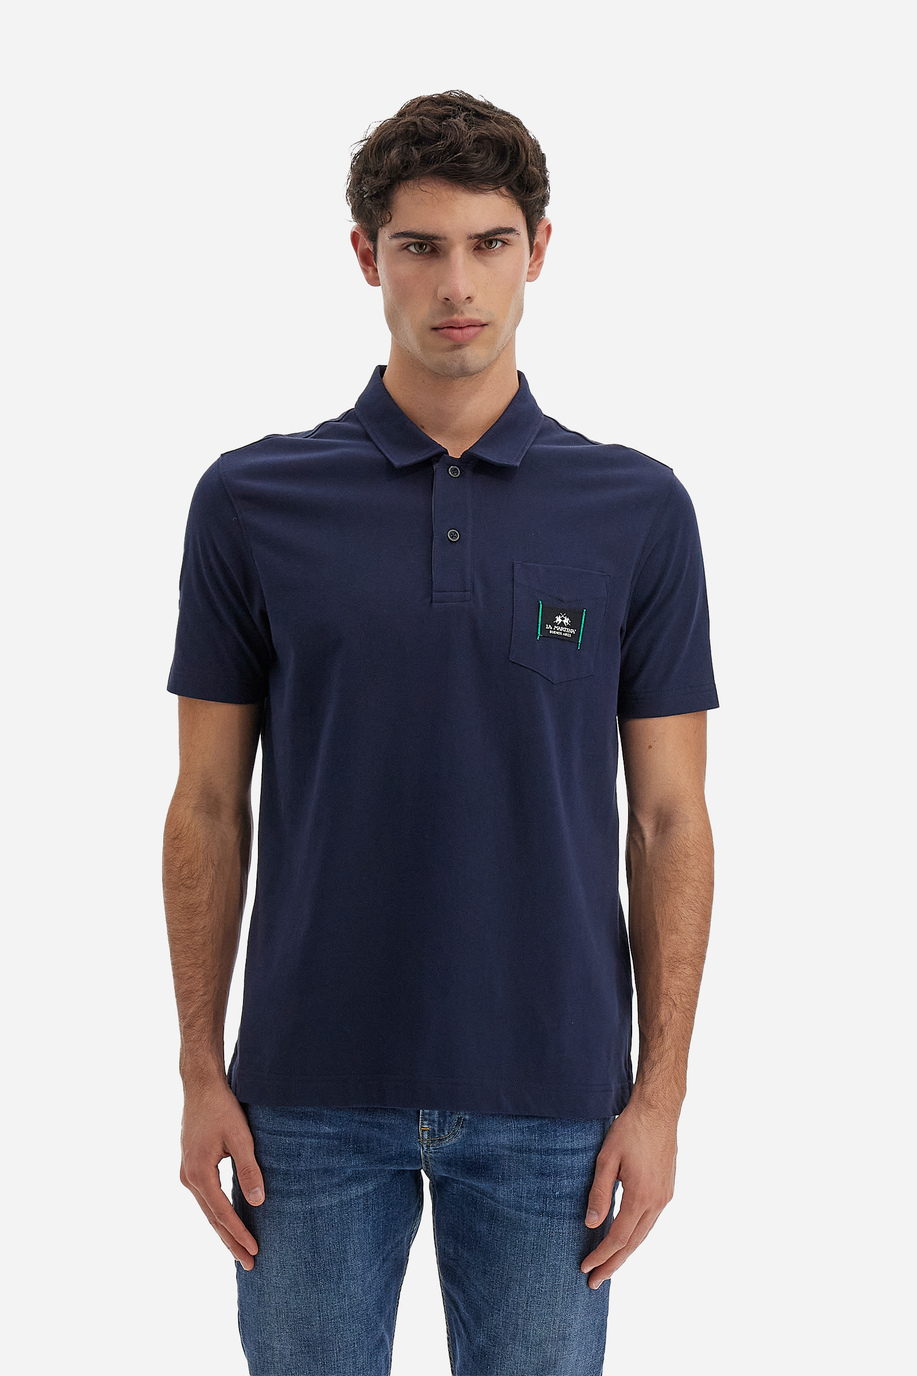 Men's short-sleeved polo shirt Logos with flat mini pocket in solid color - Vasant - Polo Shirts | La Martina - Official Online Shop